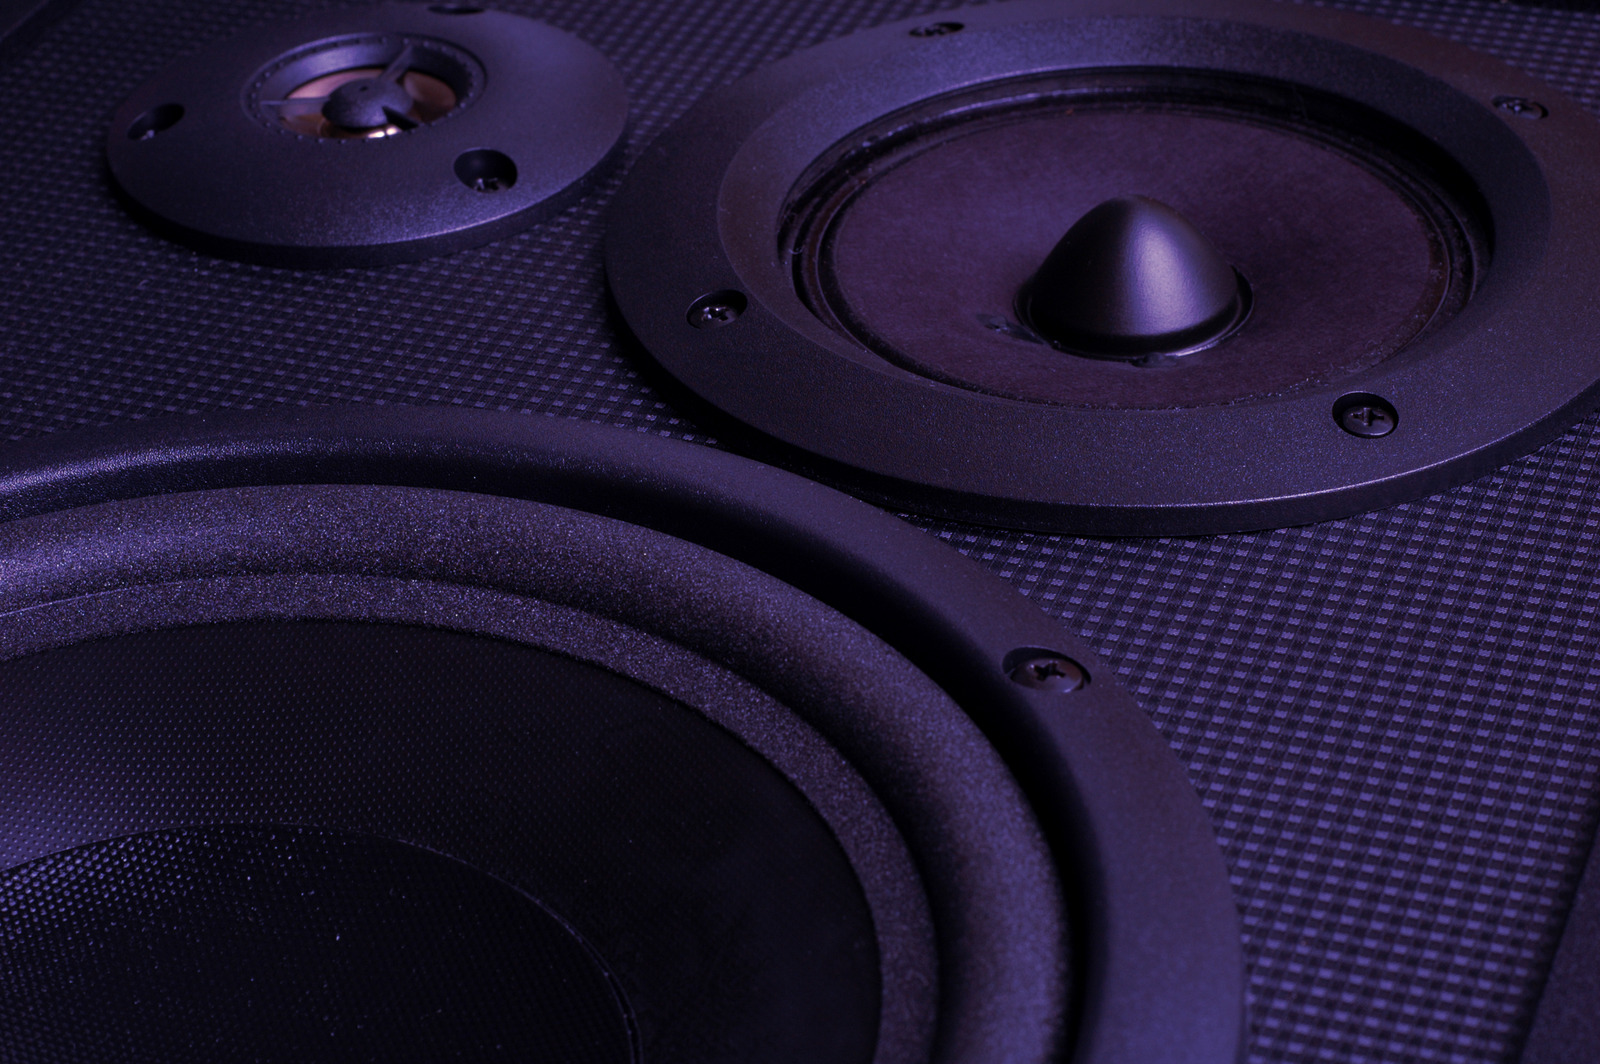 Closeup color photo of speakers in blue lighting with selective focus on the midrange speaker.http://www.ideabugmedia.com/istock/concert.jpg